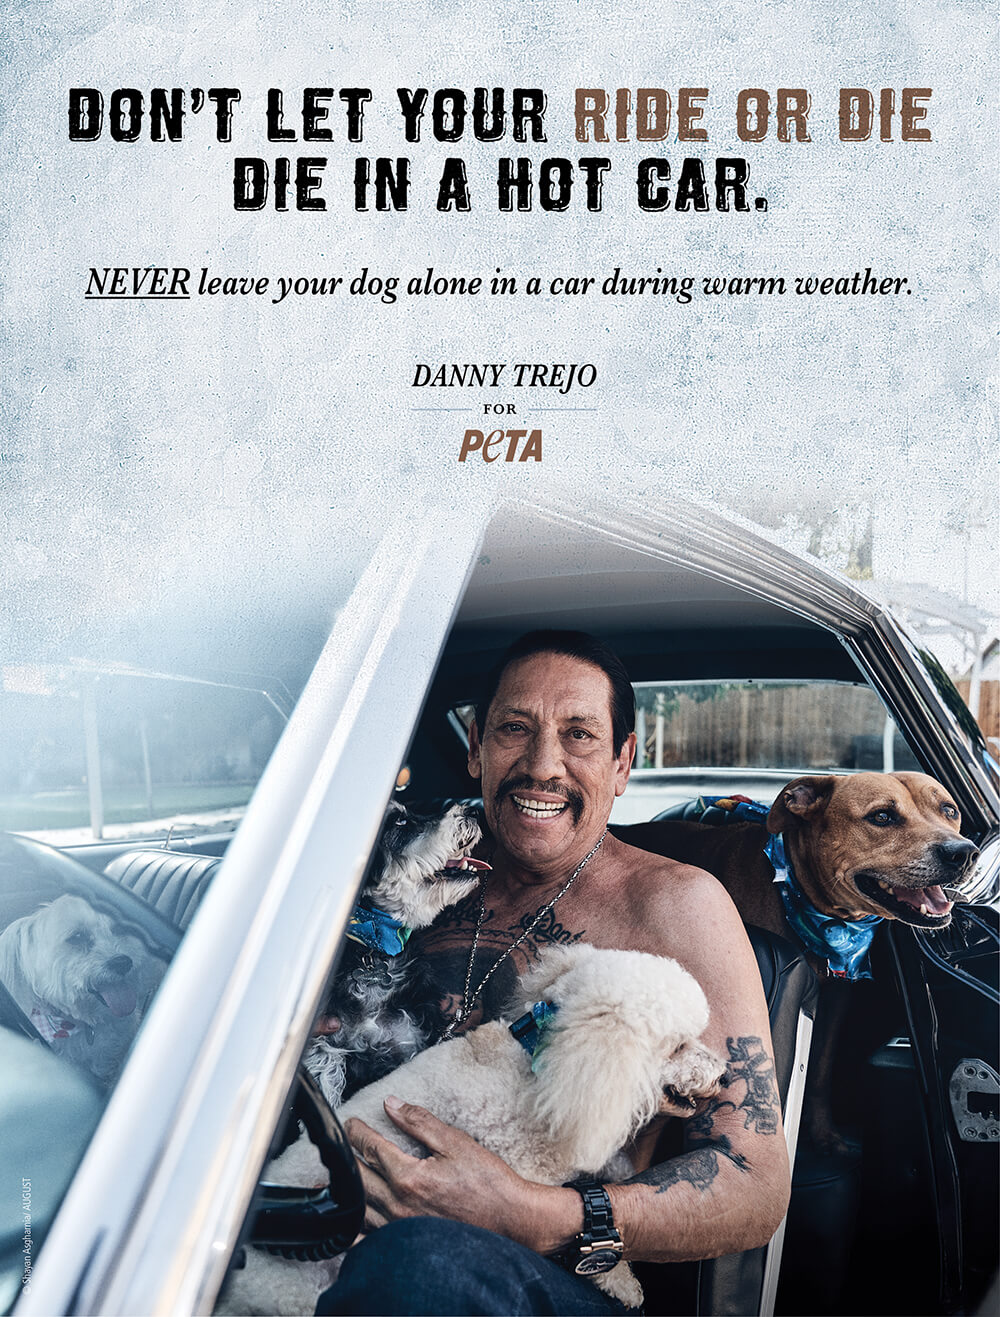 Ad picturing Danny Trejo outside in open car with multiple dogs on his lap and behind him with text that says Don't Let Your Ride Or Die Die In A Hot Car.